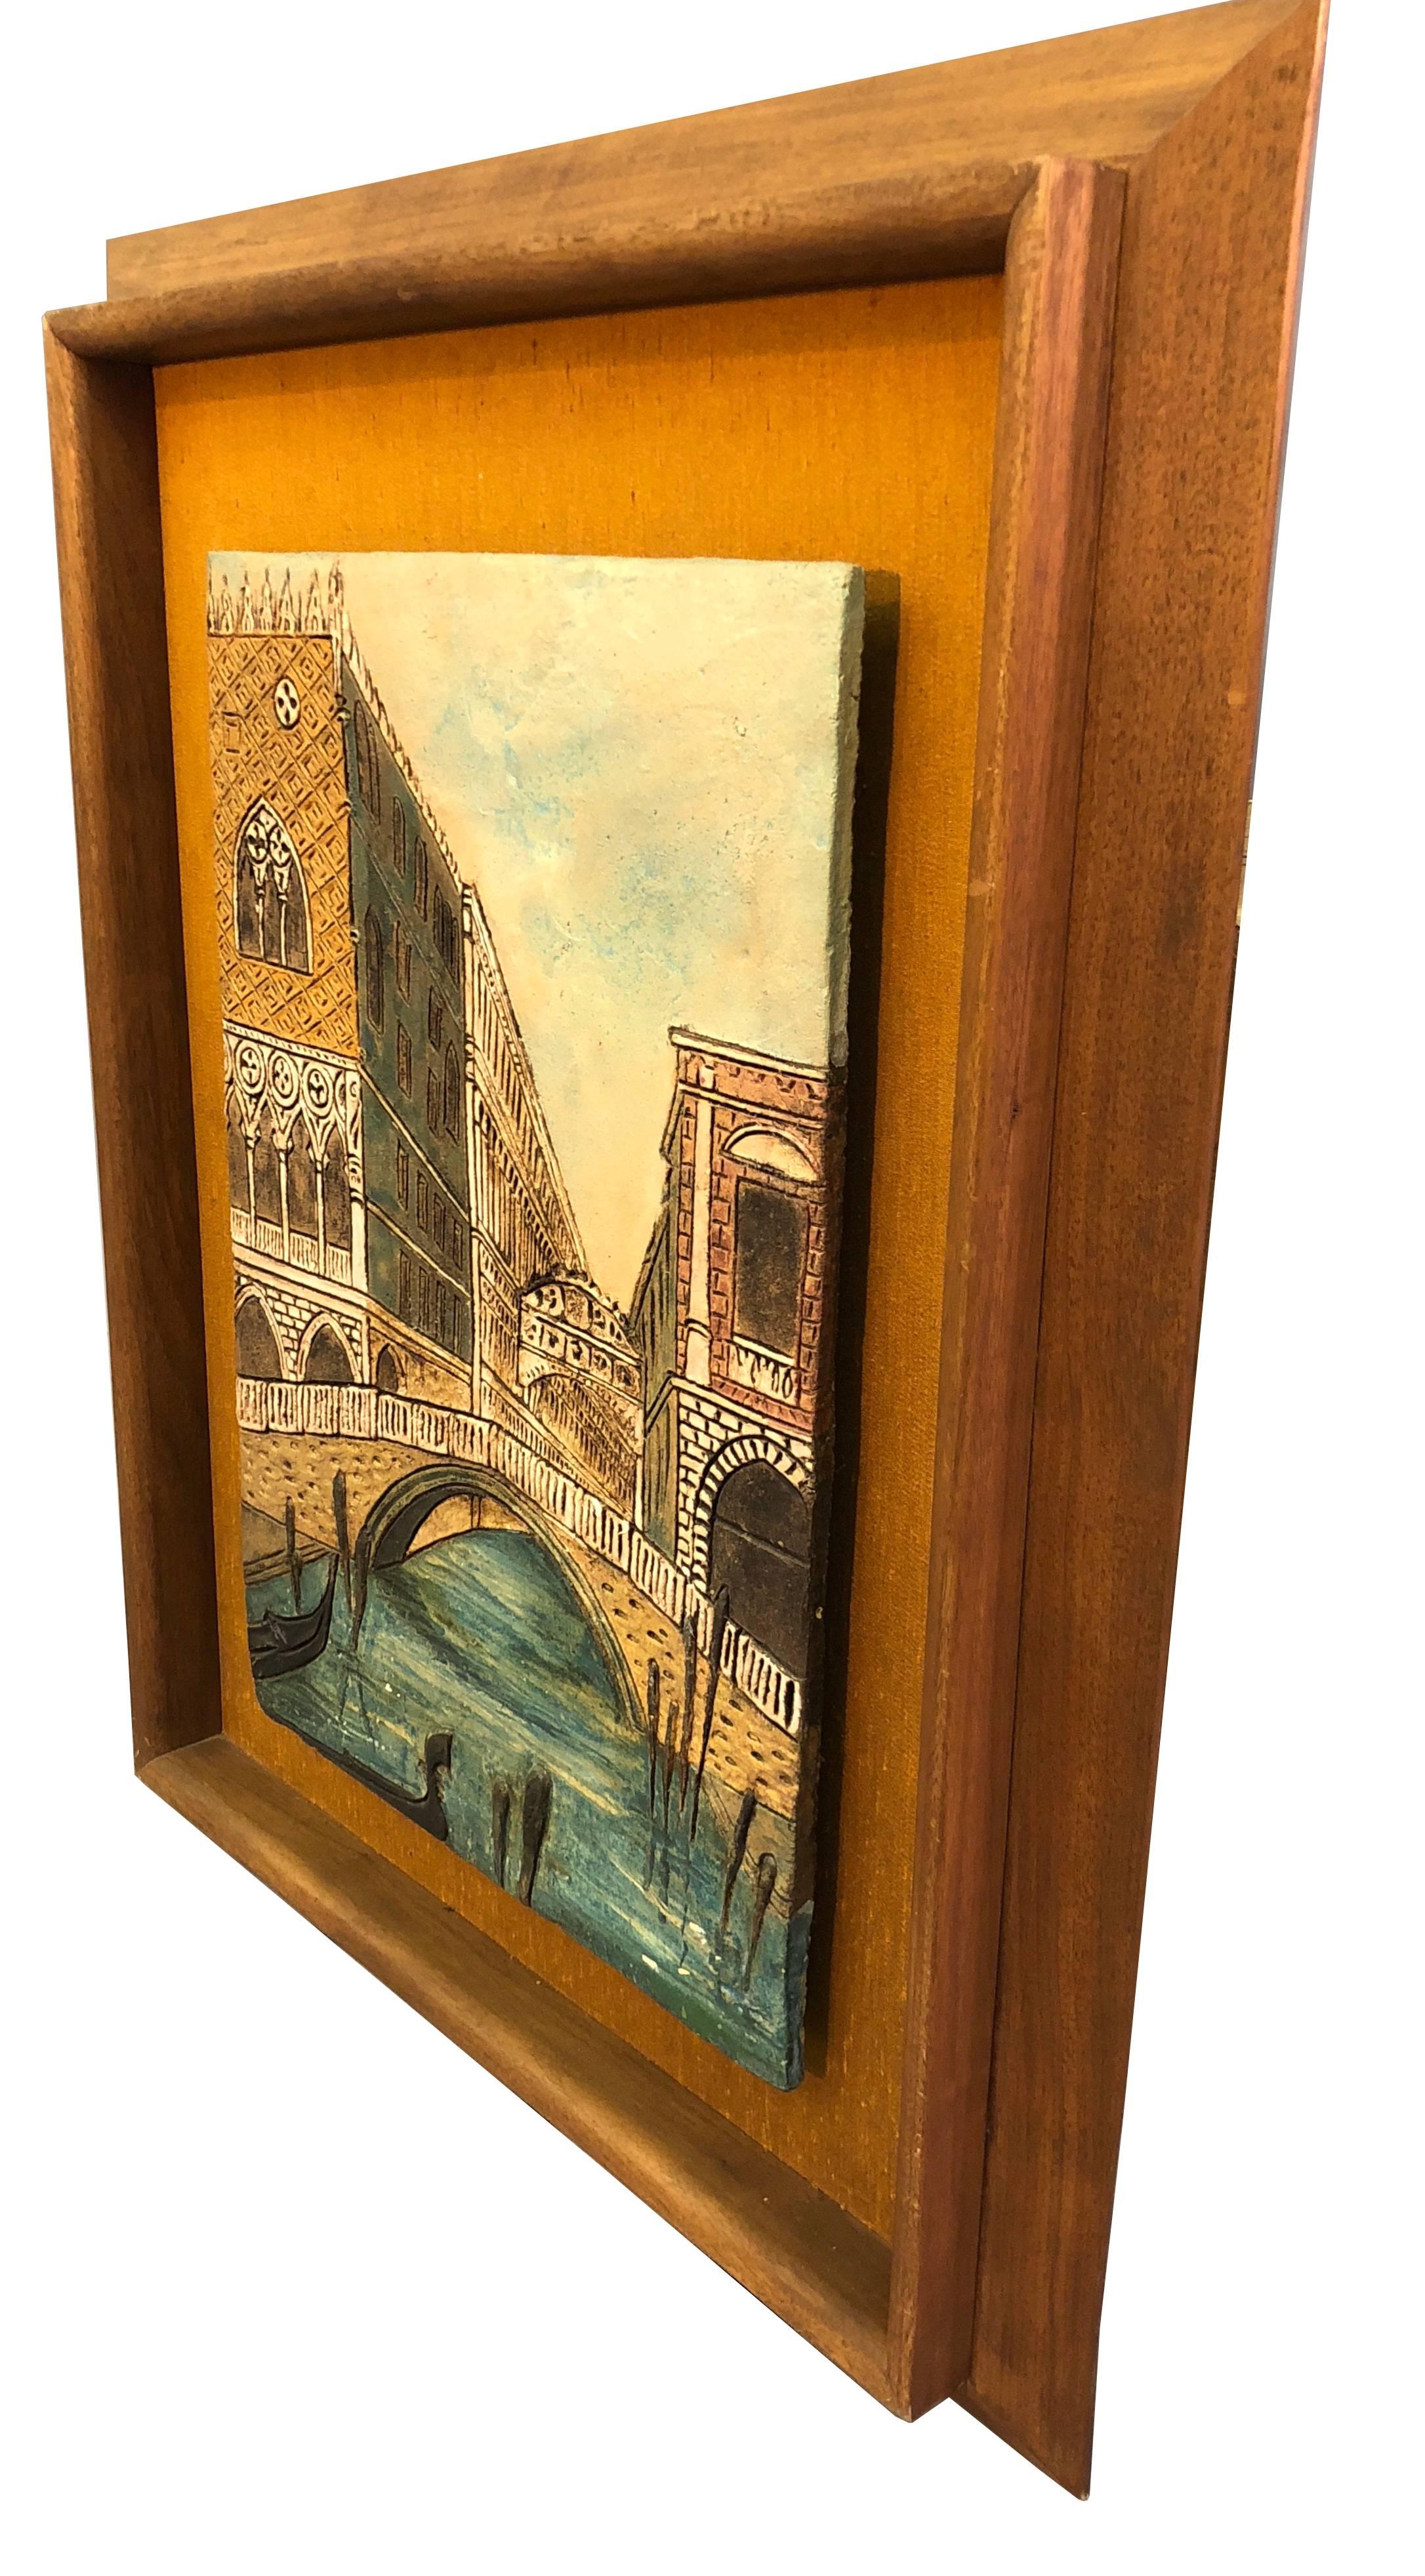 Mid-20th Century Italian Scene Tile Framed Wall Plaque In Good Condition For Sale In Amherst, NH